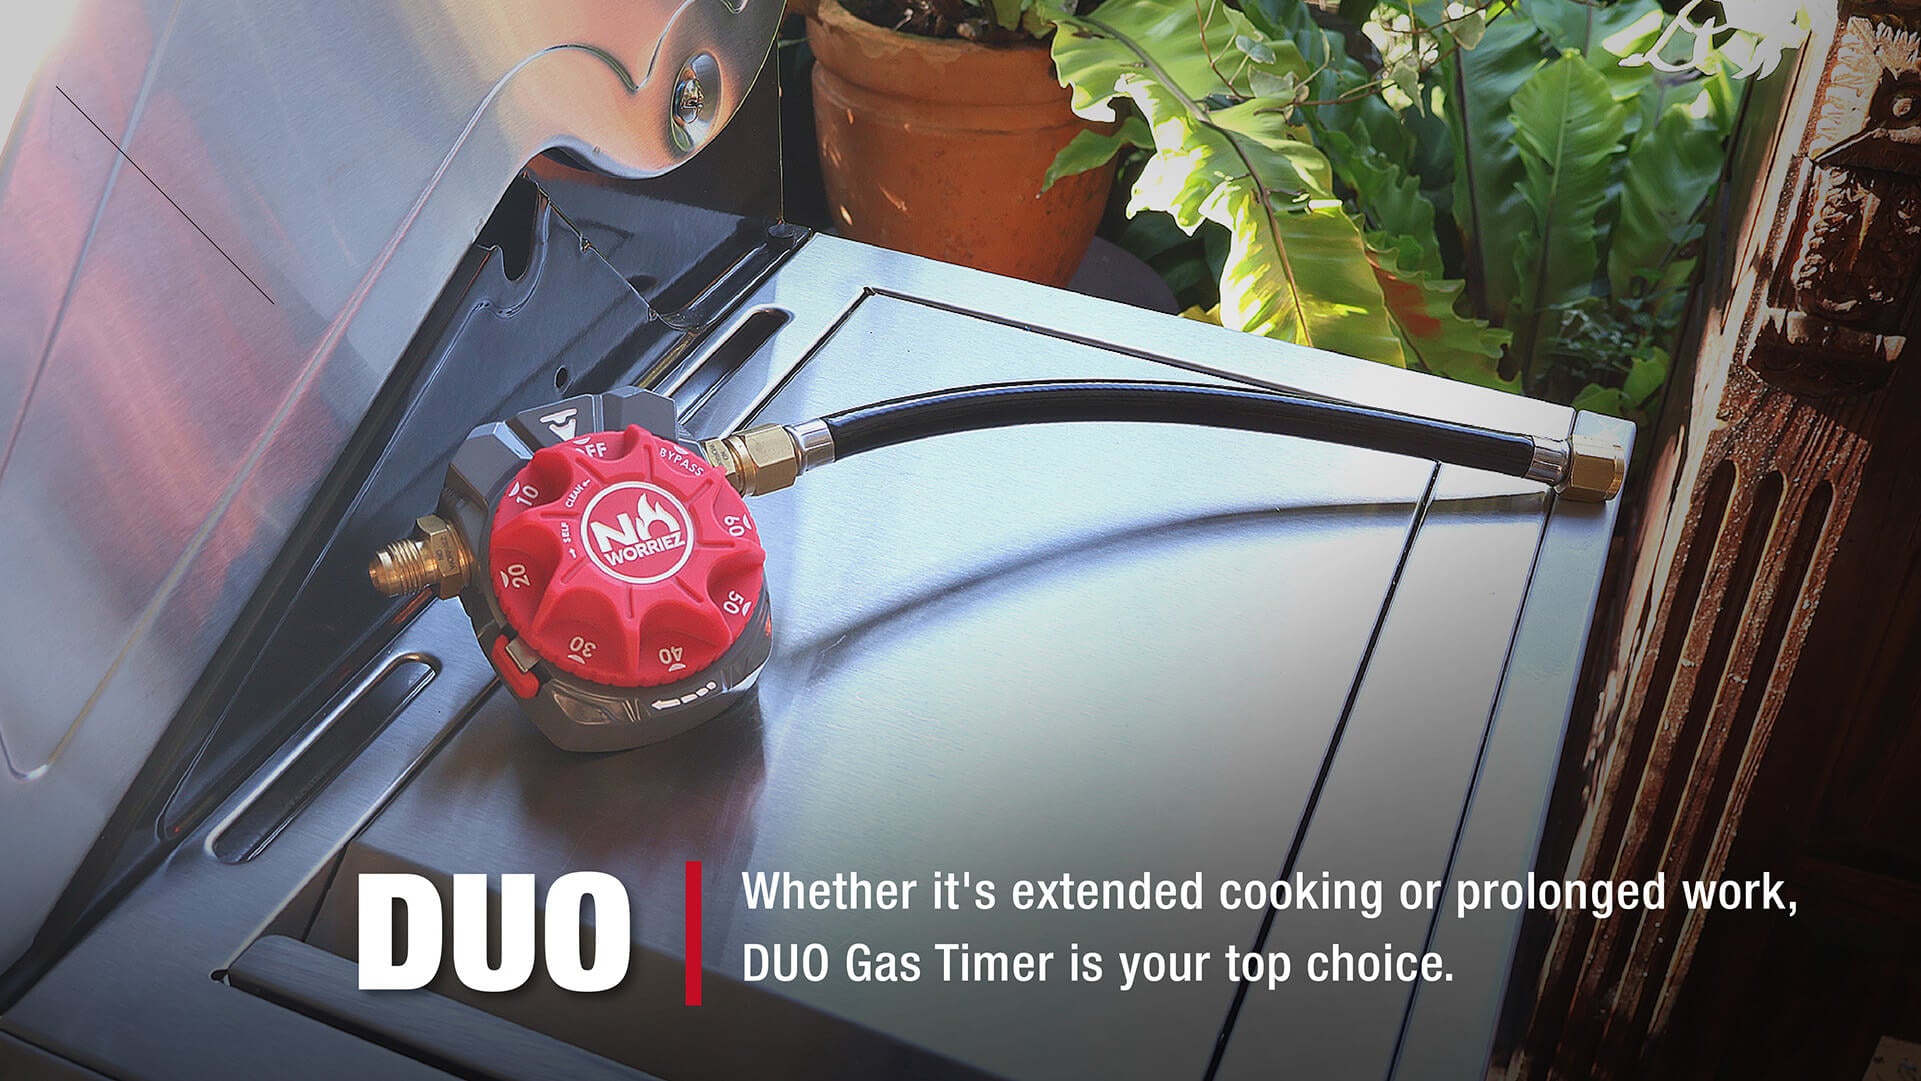 No Worriez DUO gas timer is your top choice